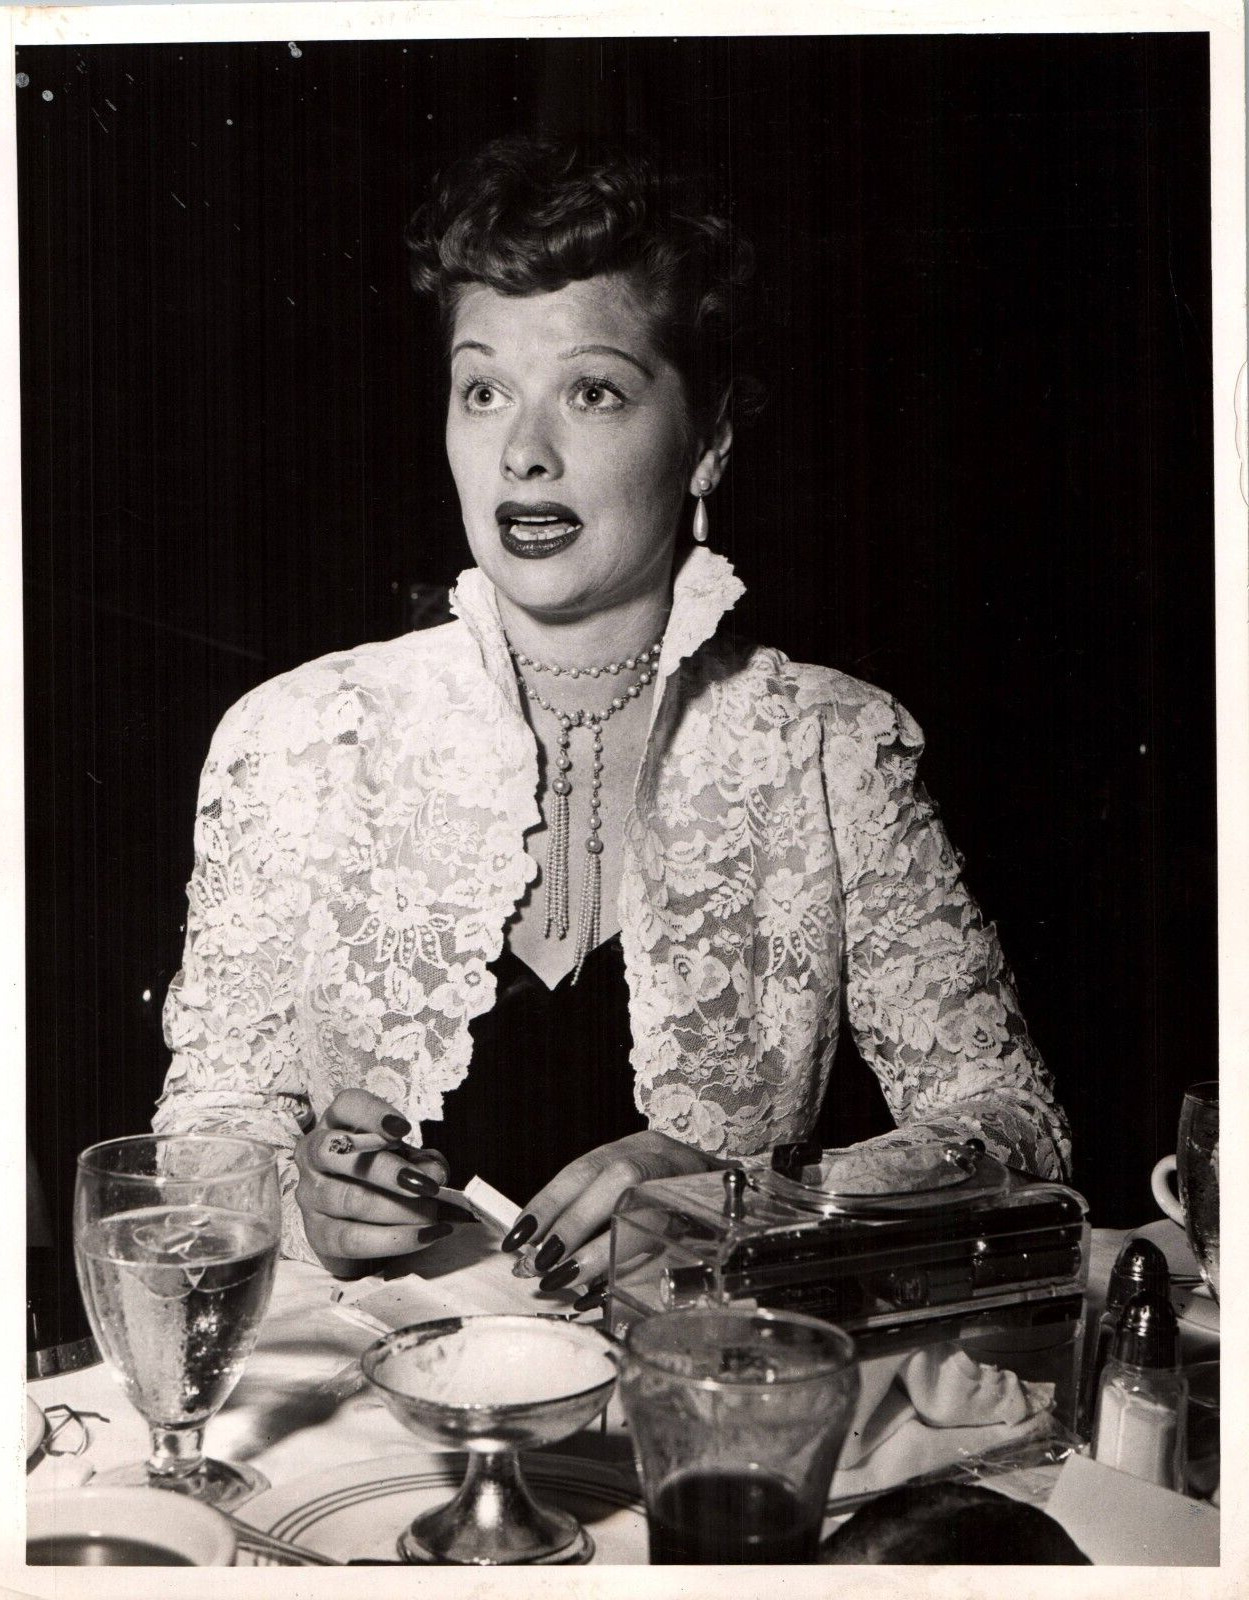 HOLLYWOOD BEAUTY LUCILLE BALL STUNNING PORTRAIT 1940 MEL TRAXEL ORIG Photo C37